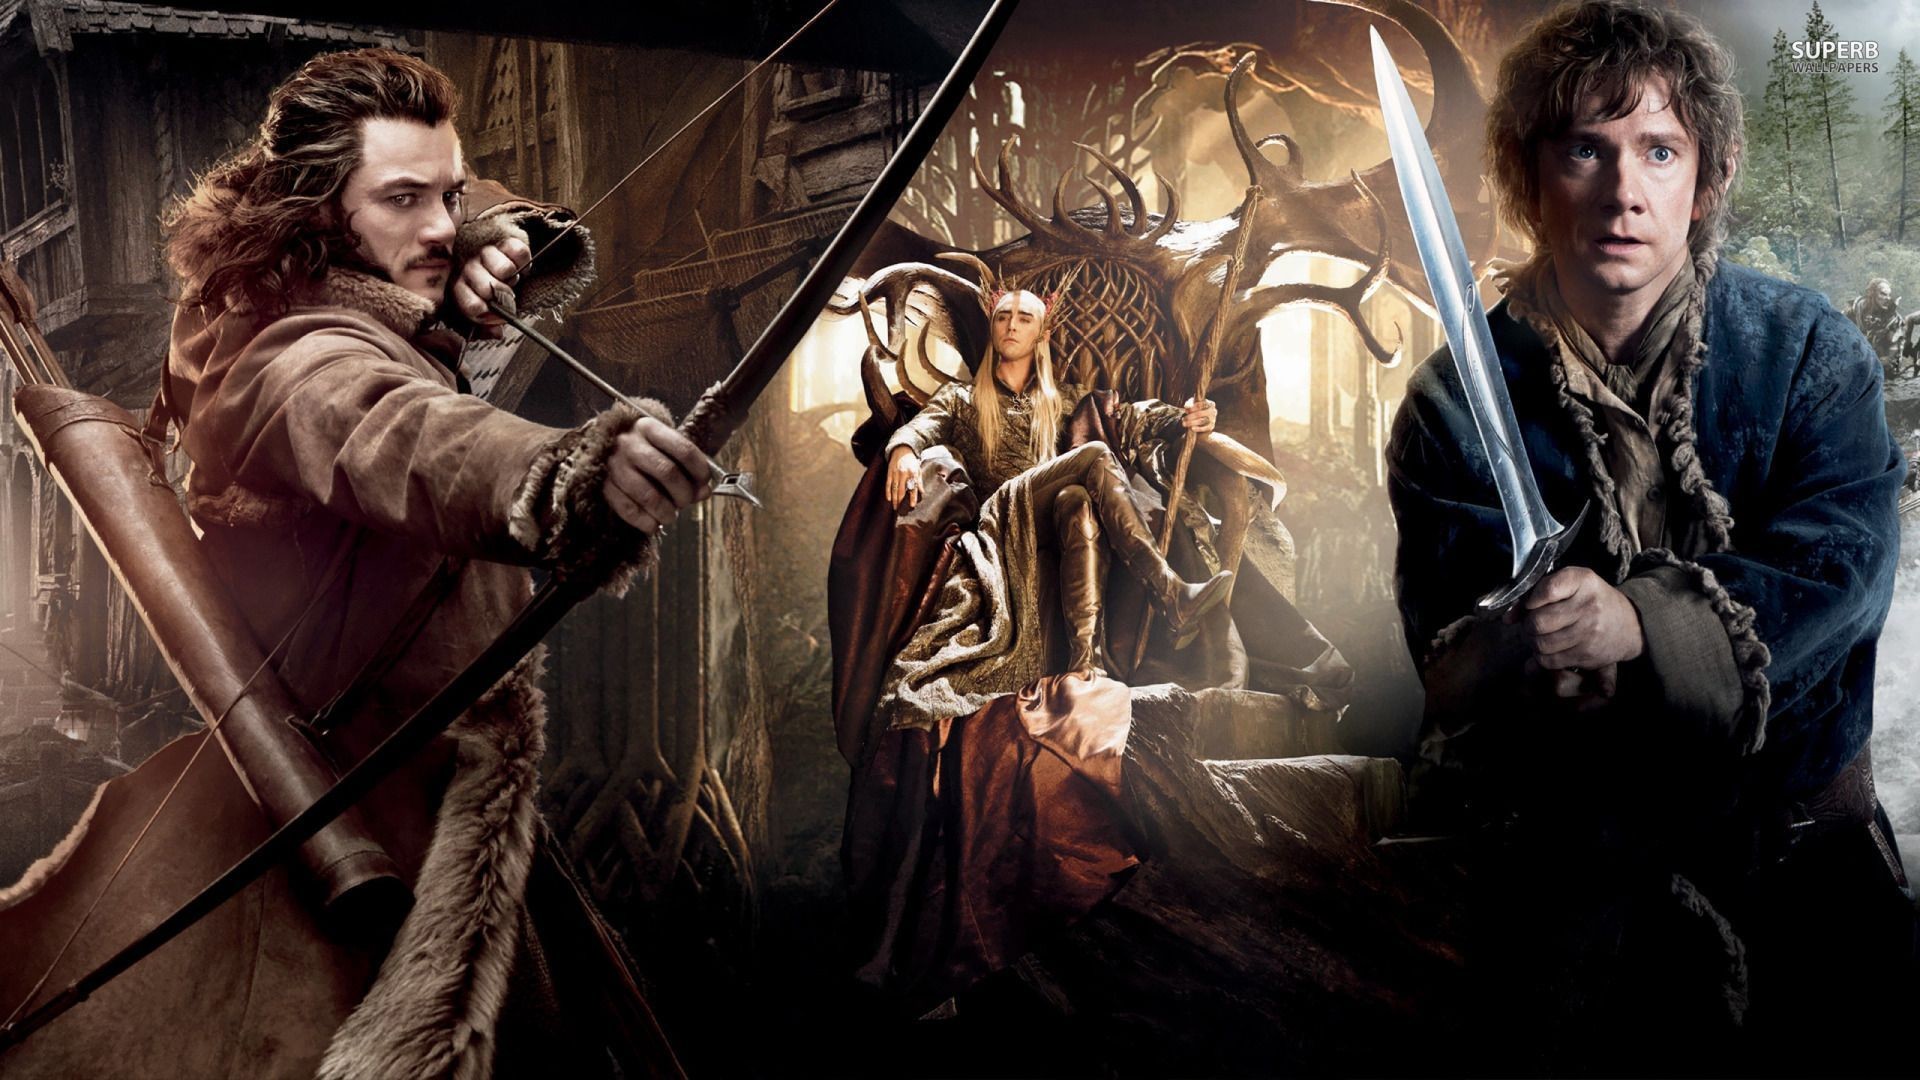 1920x1080 The Hobbit: The Desolation of Smaug wallpaper - Movie wallpapers .